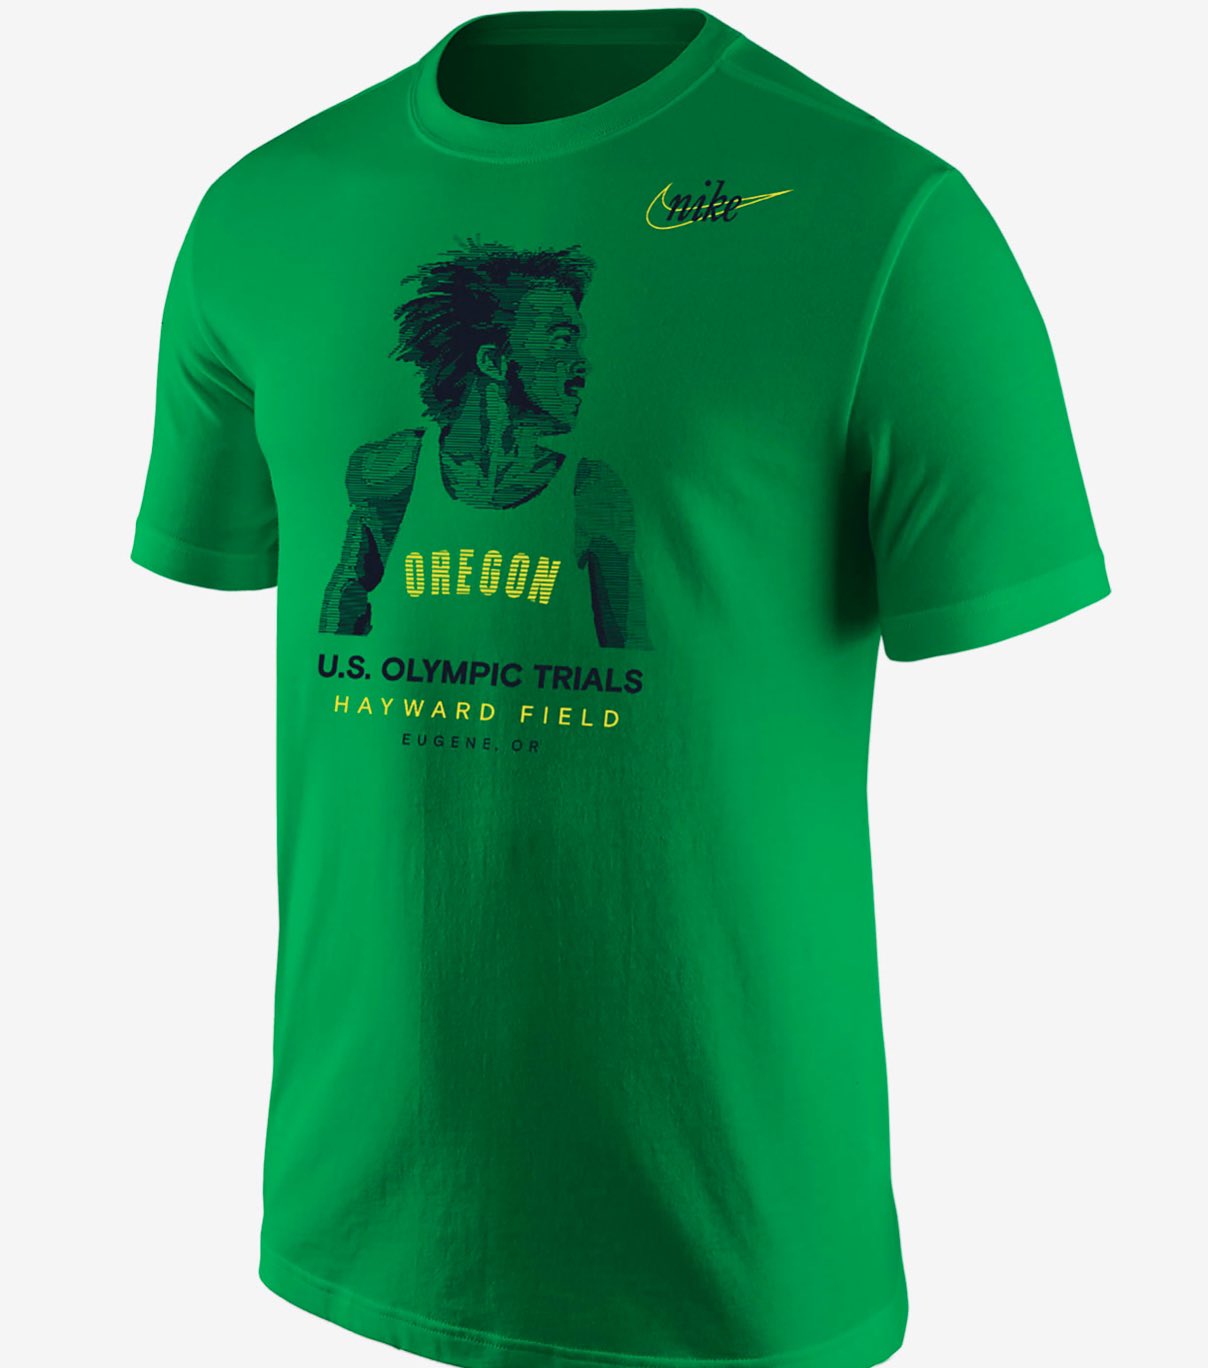 Darren Rovell on Twitter: "The evolution of On the left is Nike's first apparel item ever — a T shirt for the 1972 Olympic Trials On the is